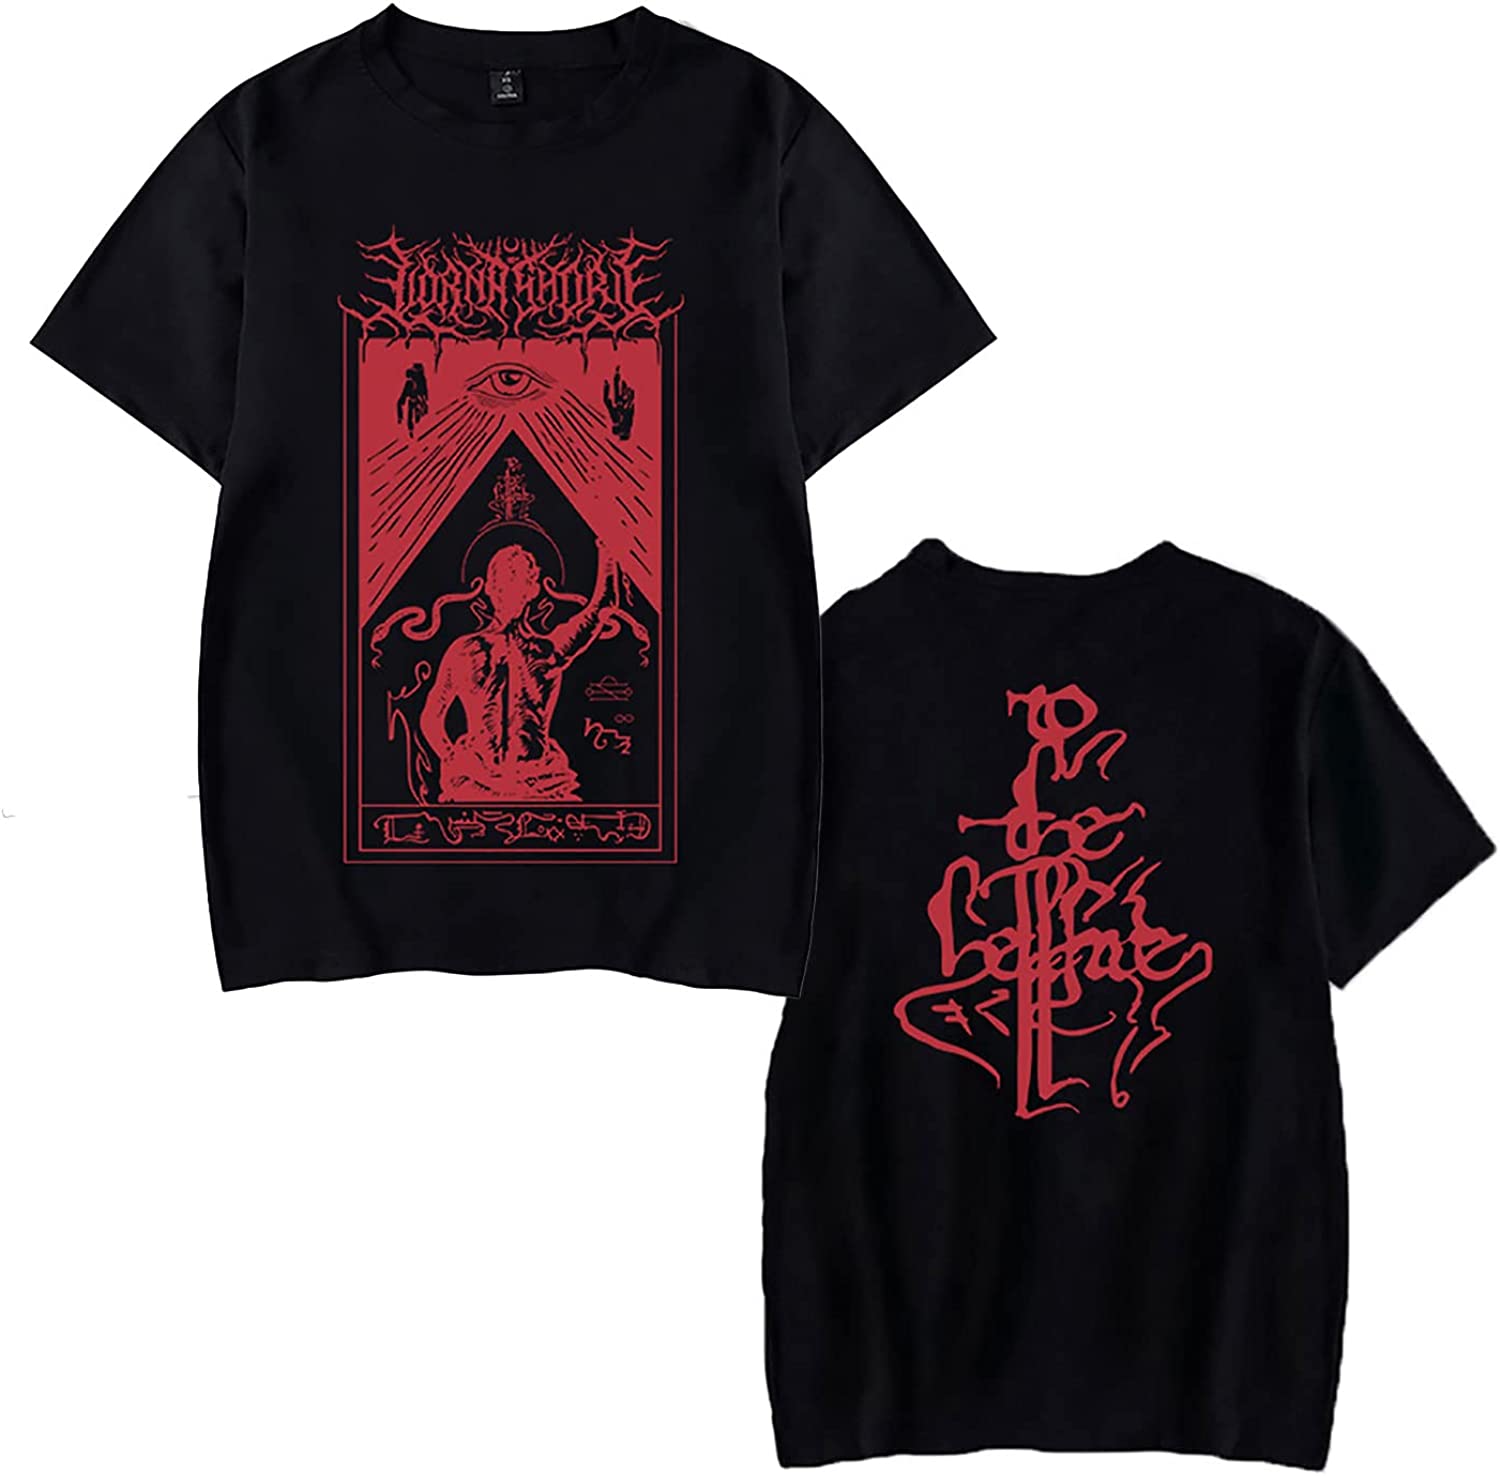 Rock Your Style with Lorna Shore Official Merch